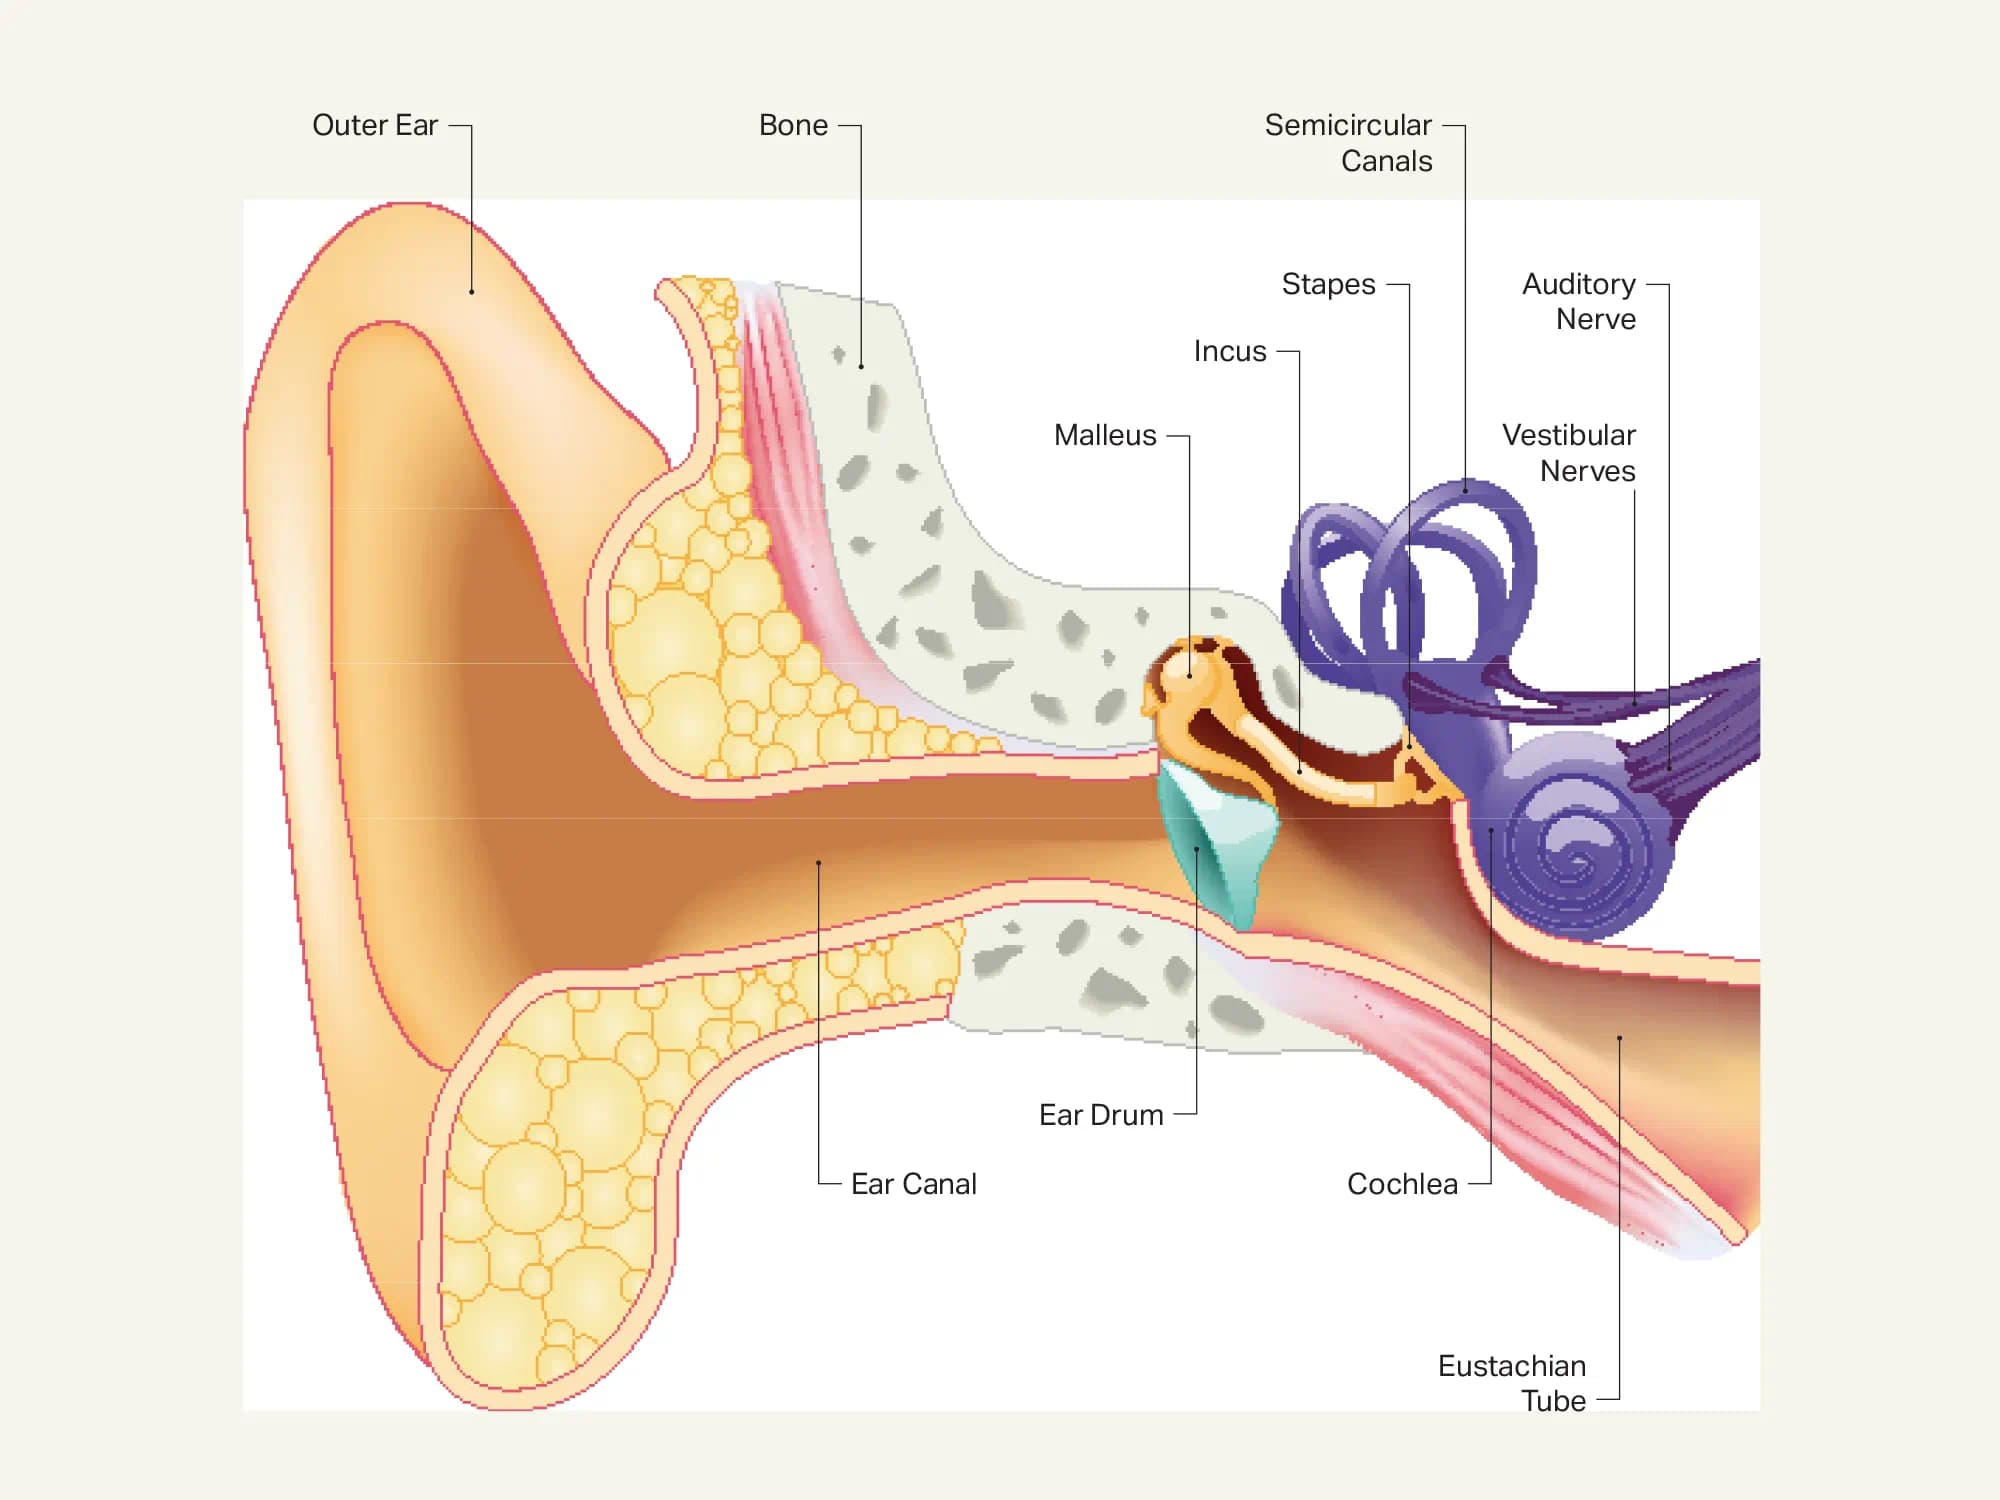 HearUSA understands the anatomy of your year and can explain how hearing loss works